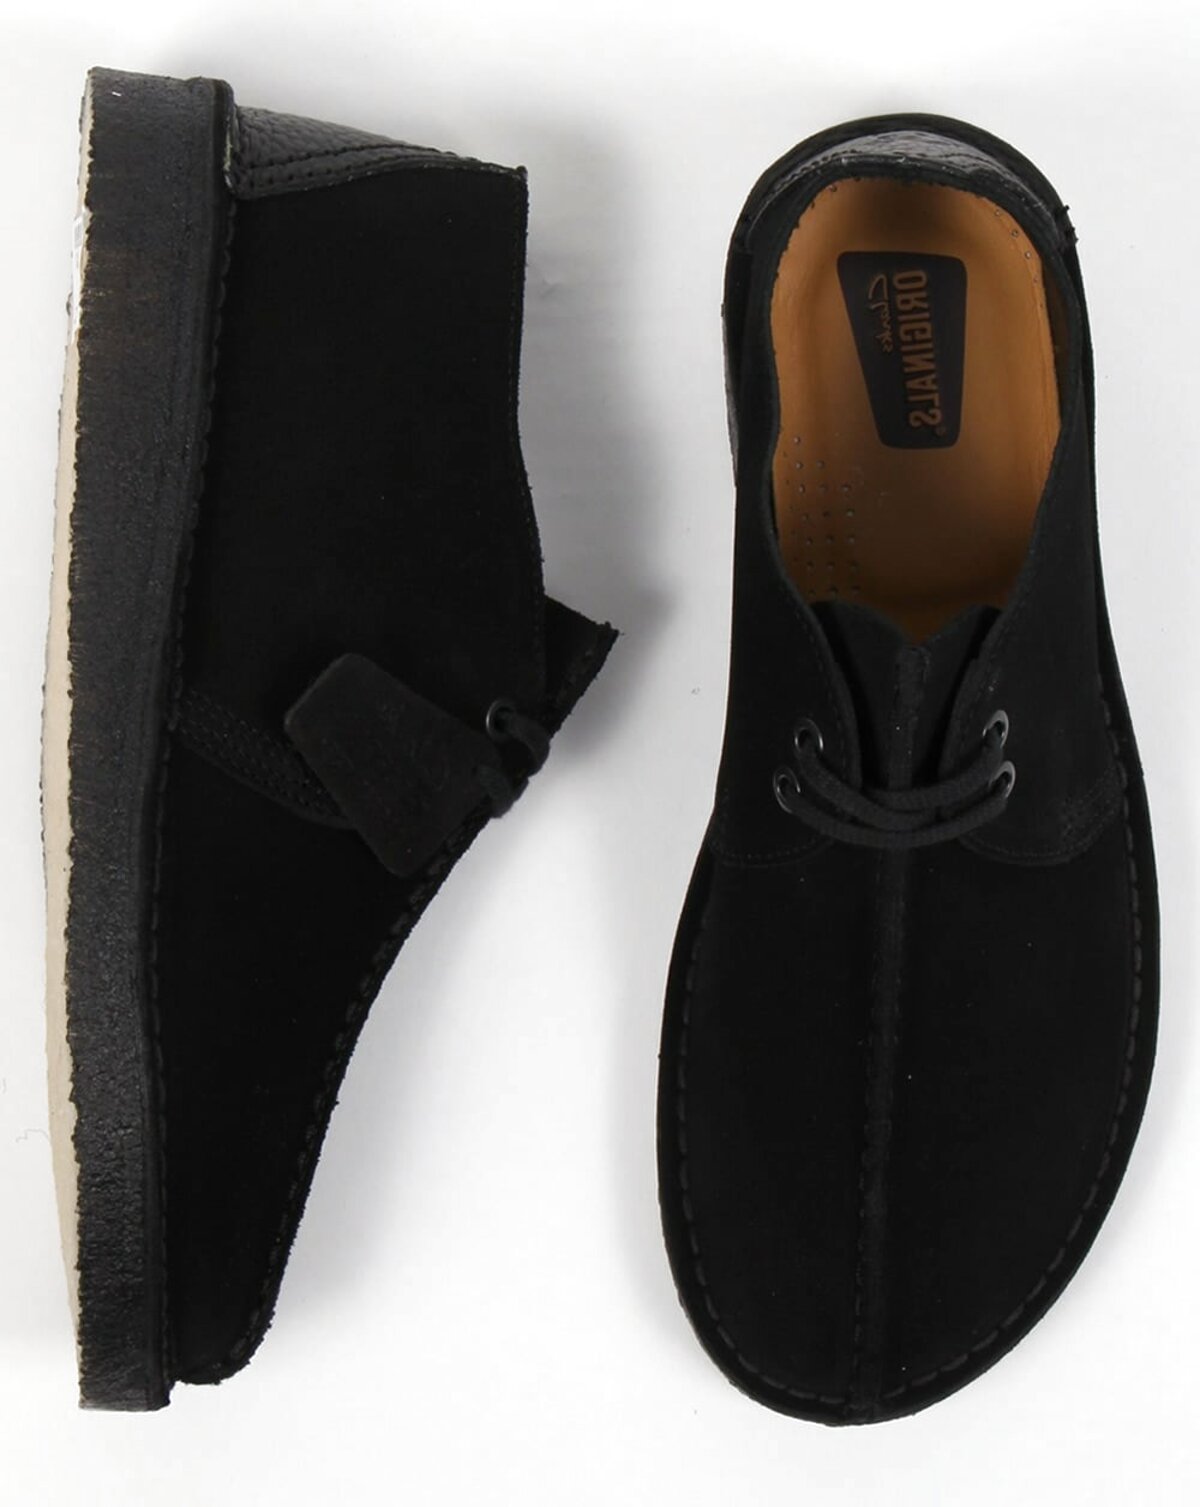 clarks co uk trainers